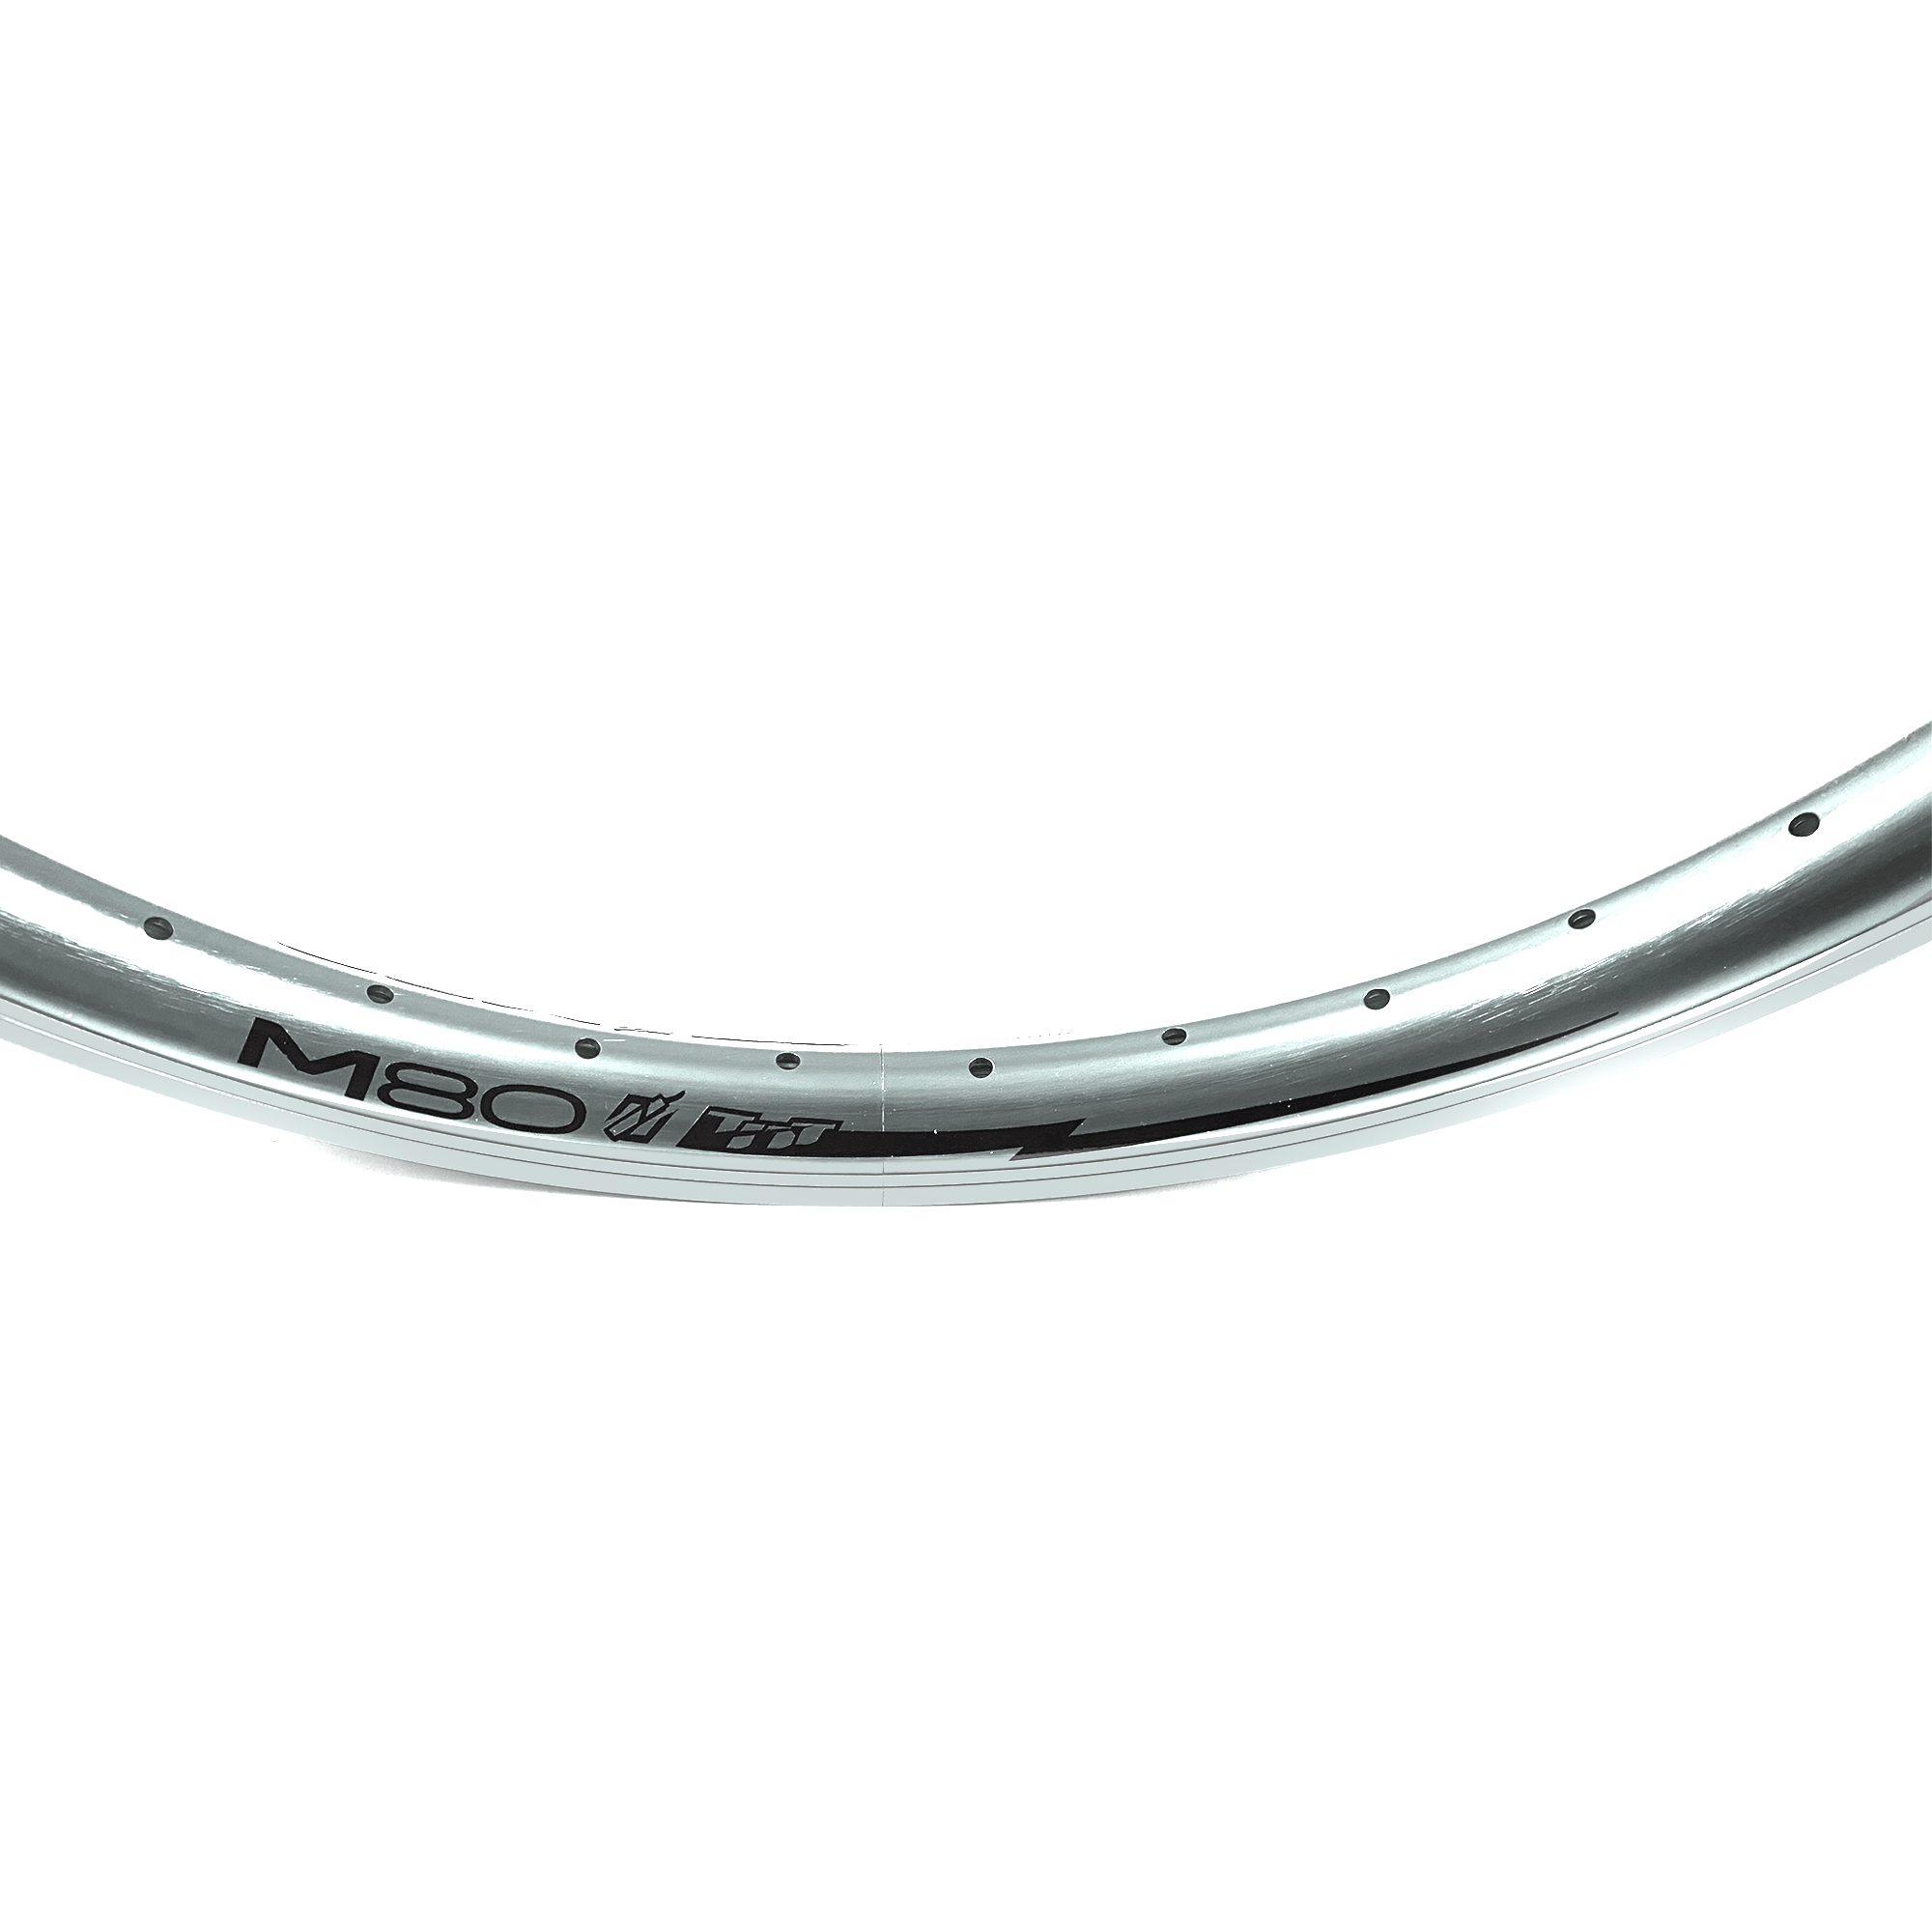 24" (507mm) TNT M80X Double Wall Rim - 36H - Silver Anodized